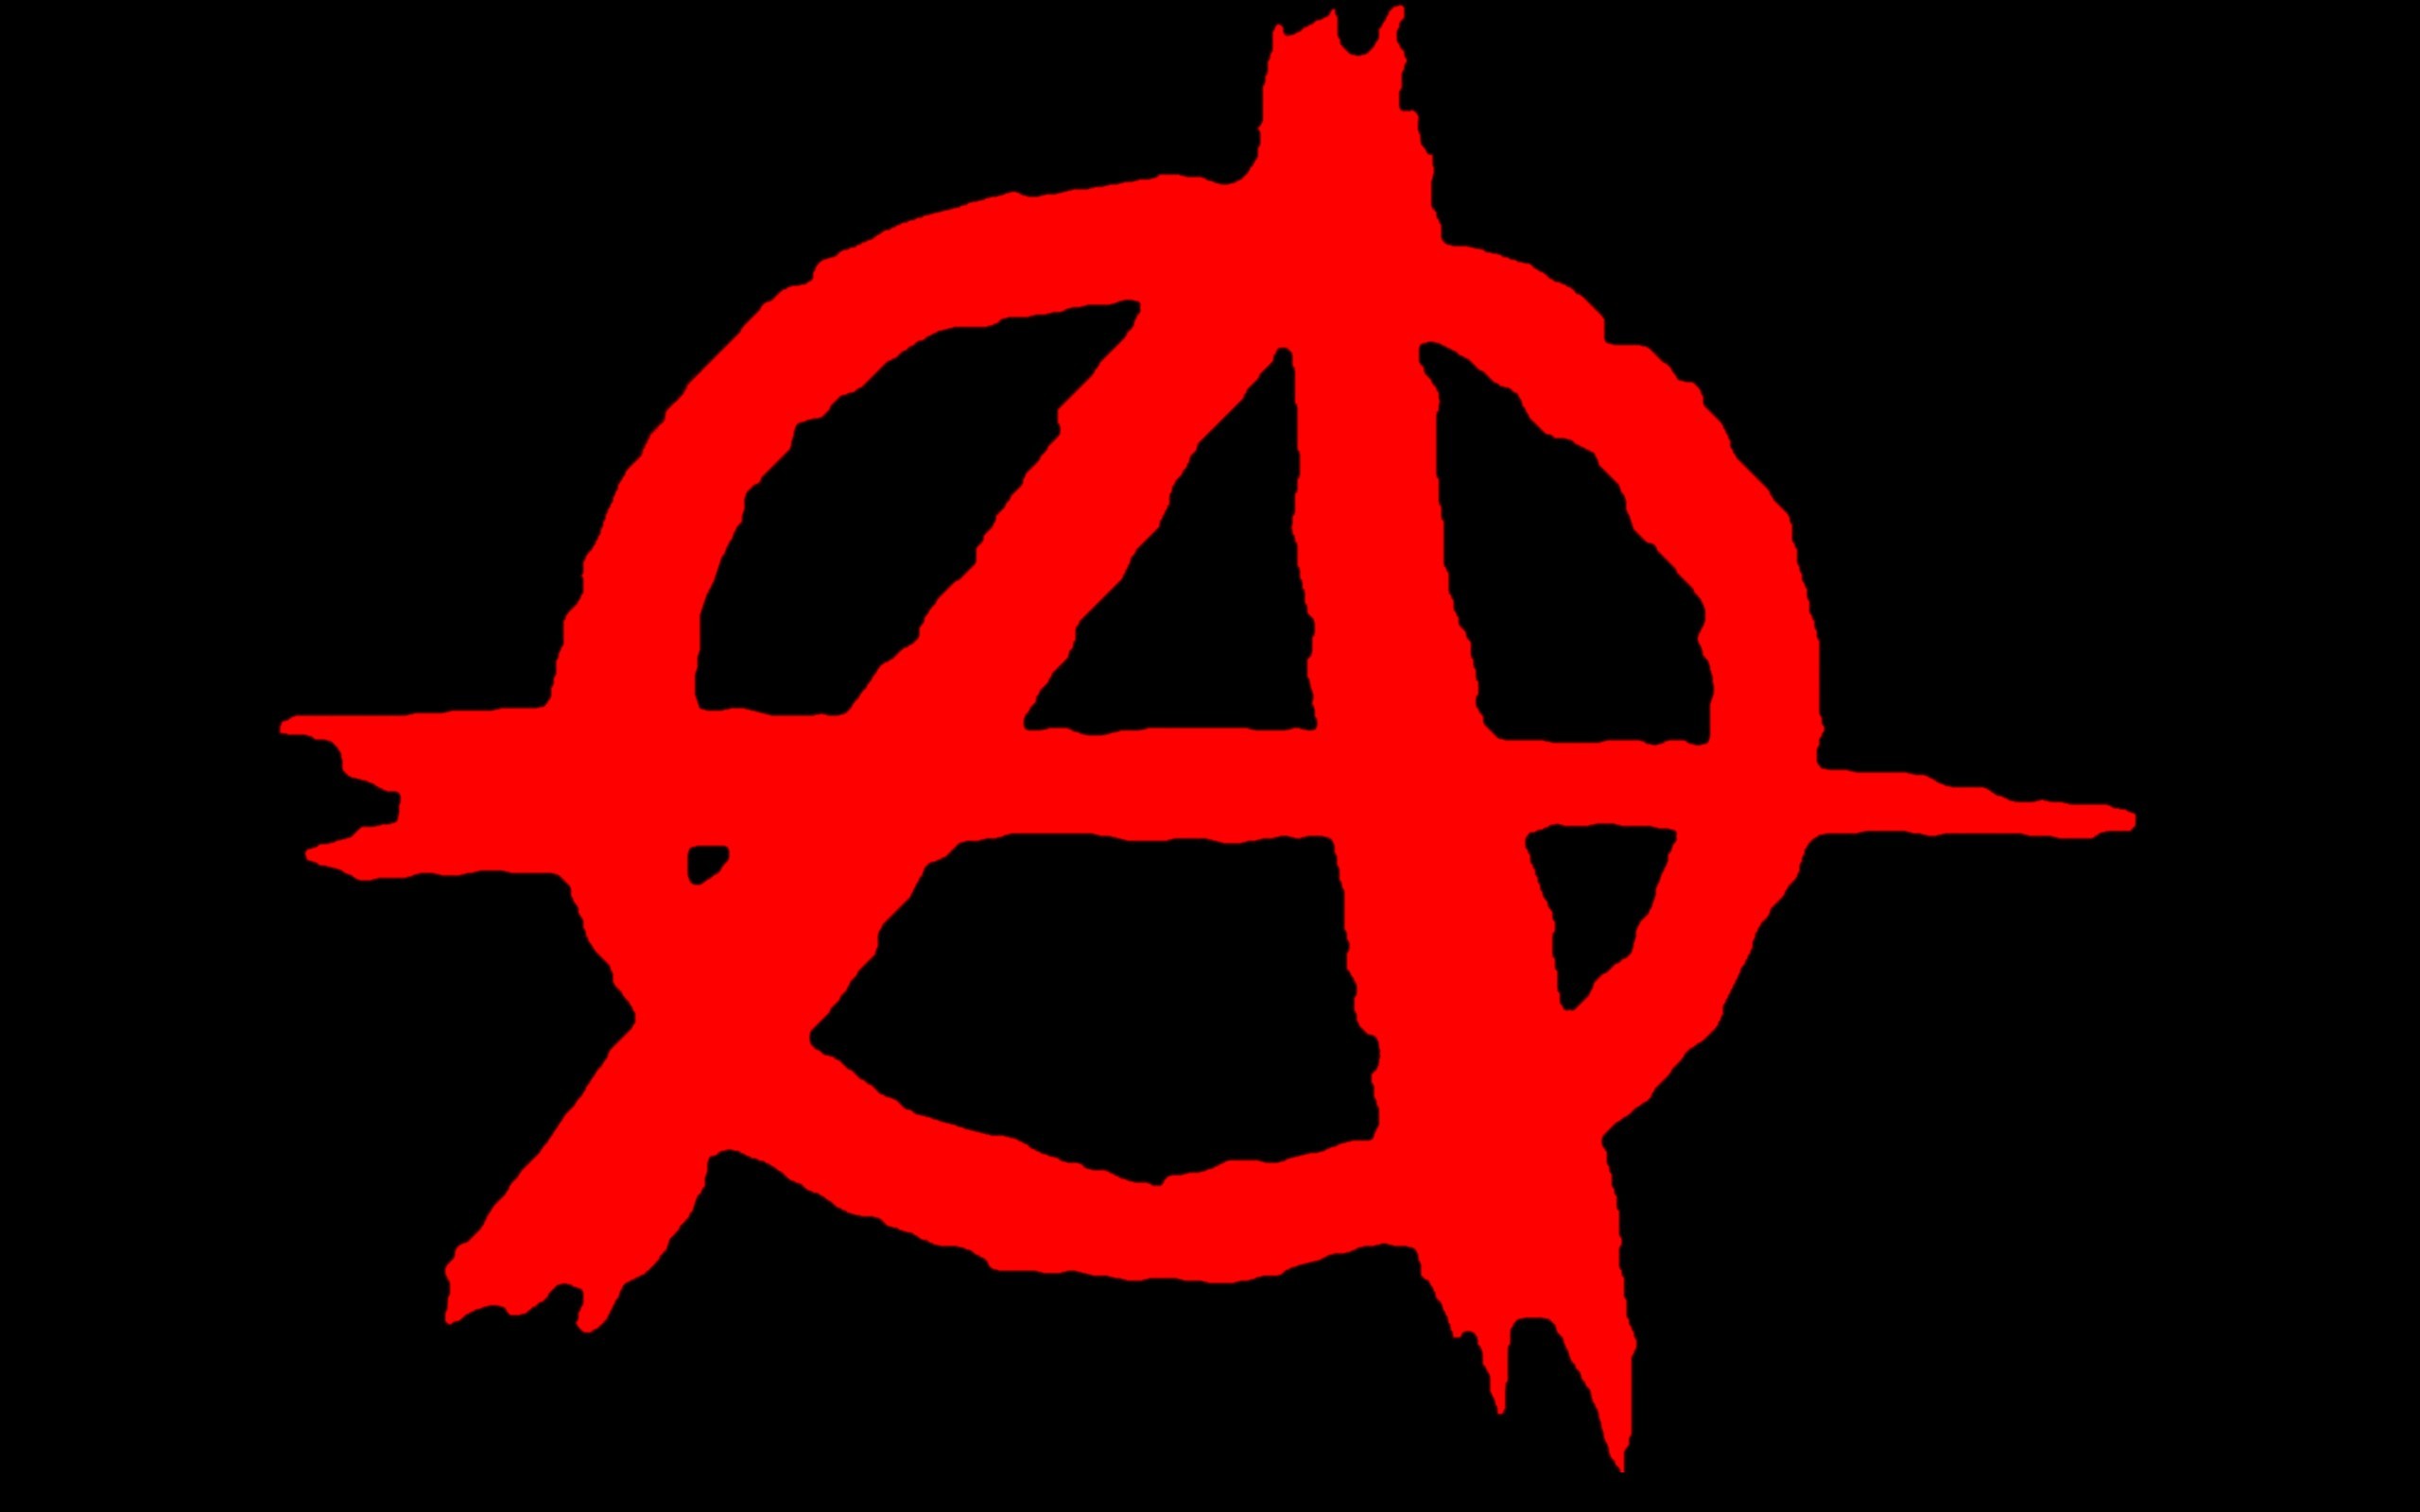 2560x1600 anarchy-peace-signs-symbol-wallpaper-peace-sign-wallpapers-for-desktop- wallpaper-hd-bedroom-free-download-border-iphone-tumblr-ipod-touch.jpg  2,560…